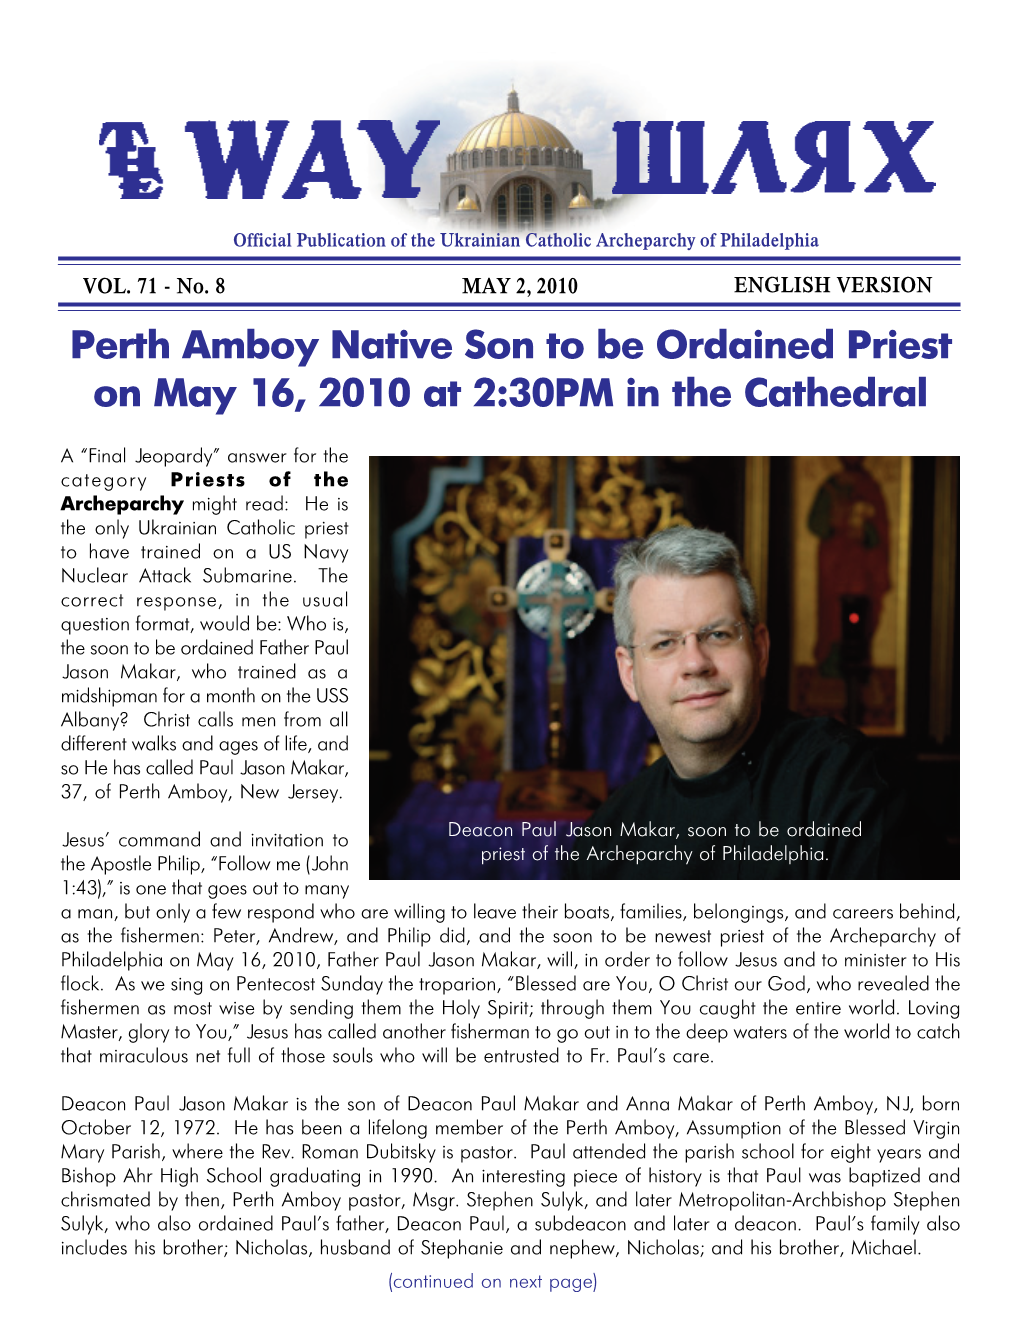 Perth Amboy Native Son to Be Ordained Priest on May 16, 2010 at 2:30PM in the Cathedral